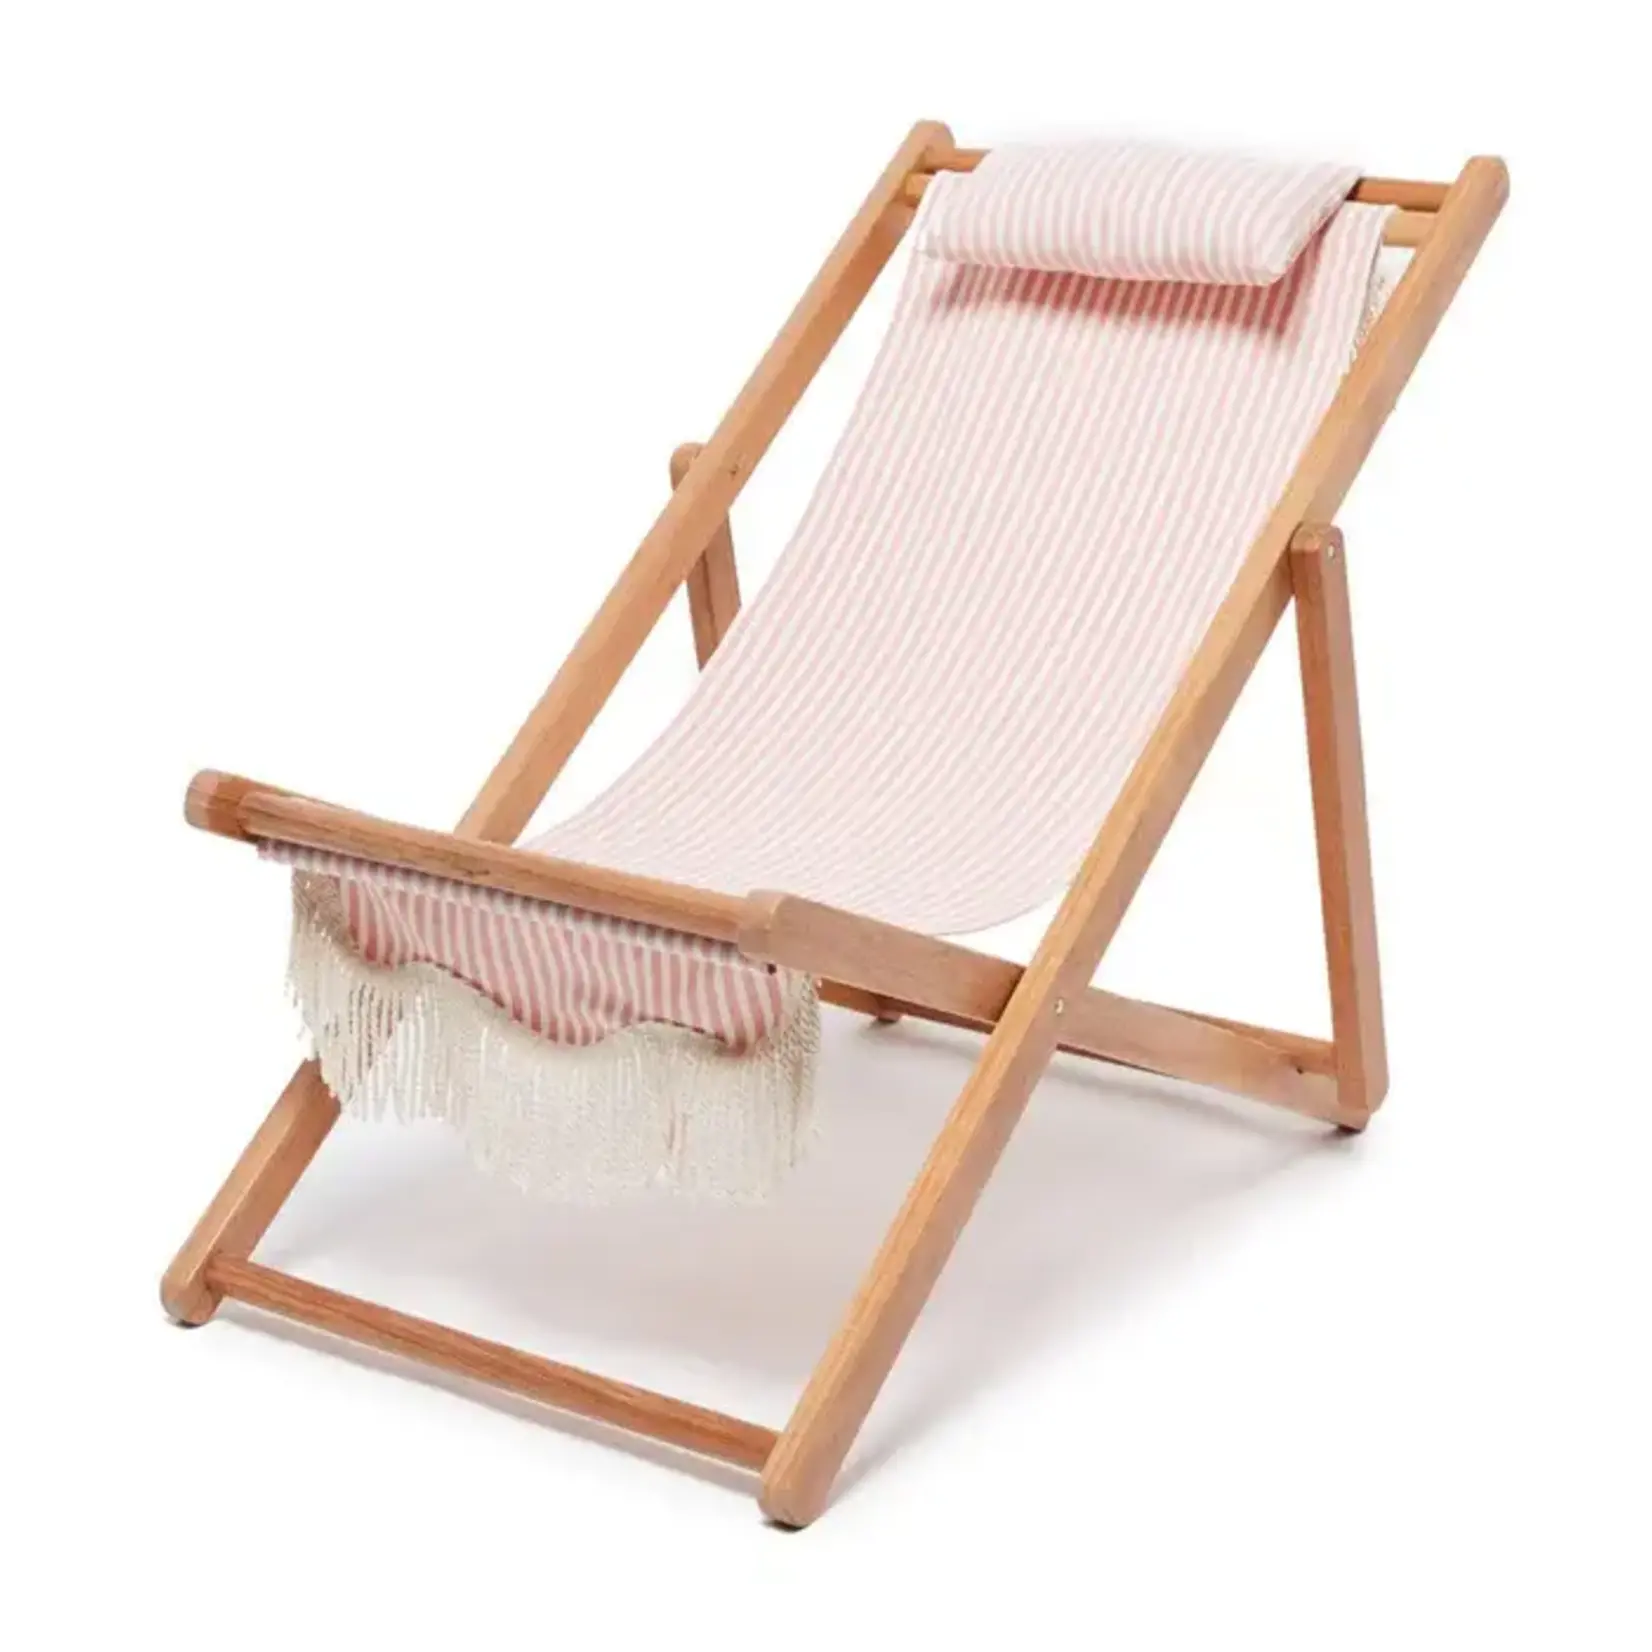 Sling Outdoor Lounge Chair, Pink/Weiss, 79cm x 59cm x 93cm